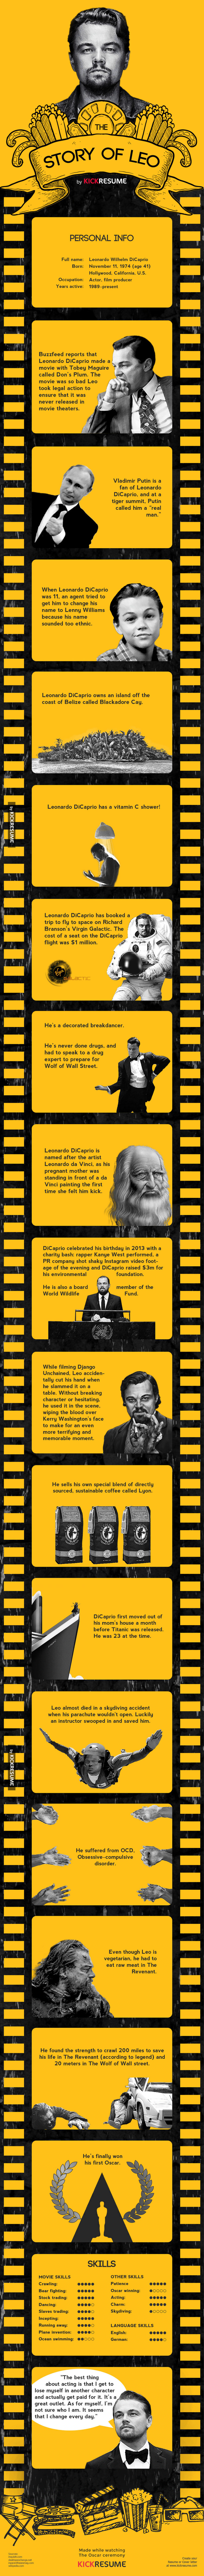 Resume Of Leonardo Dicaprio: Surprising Facts You Didn’t Know